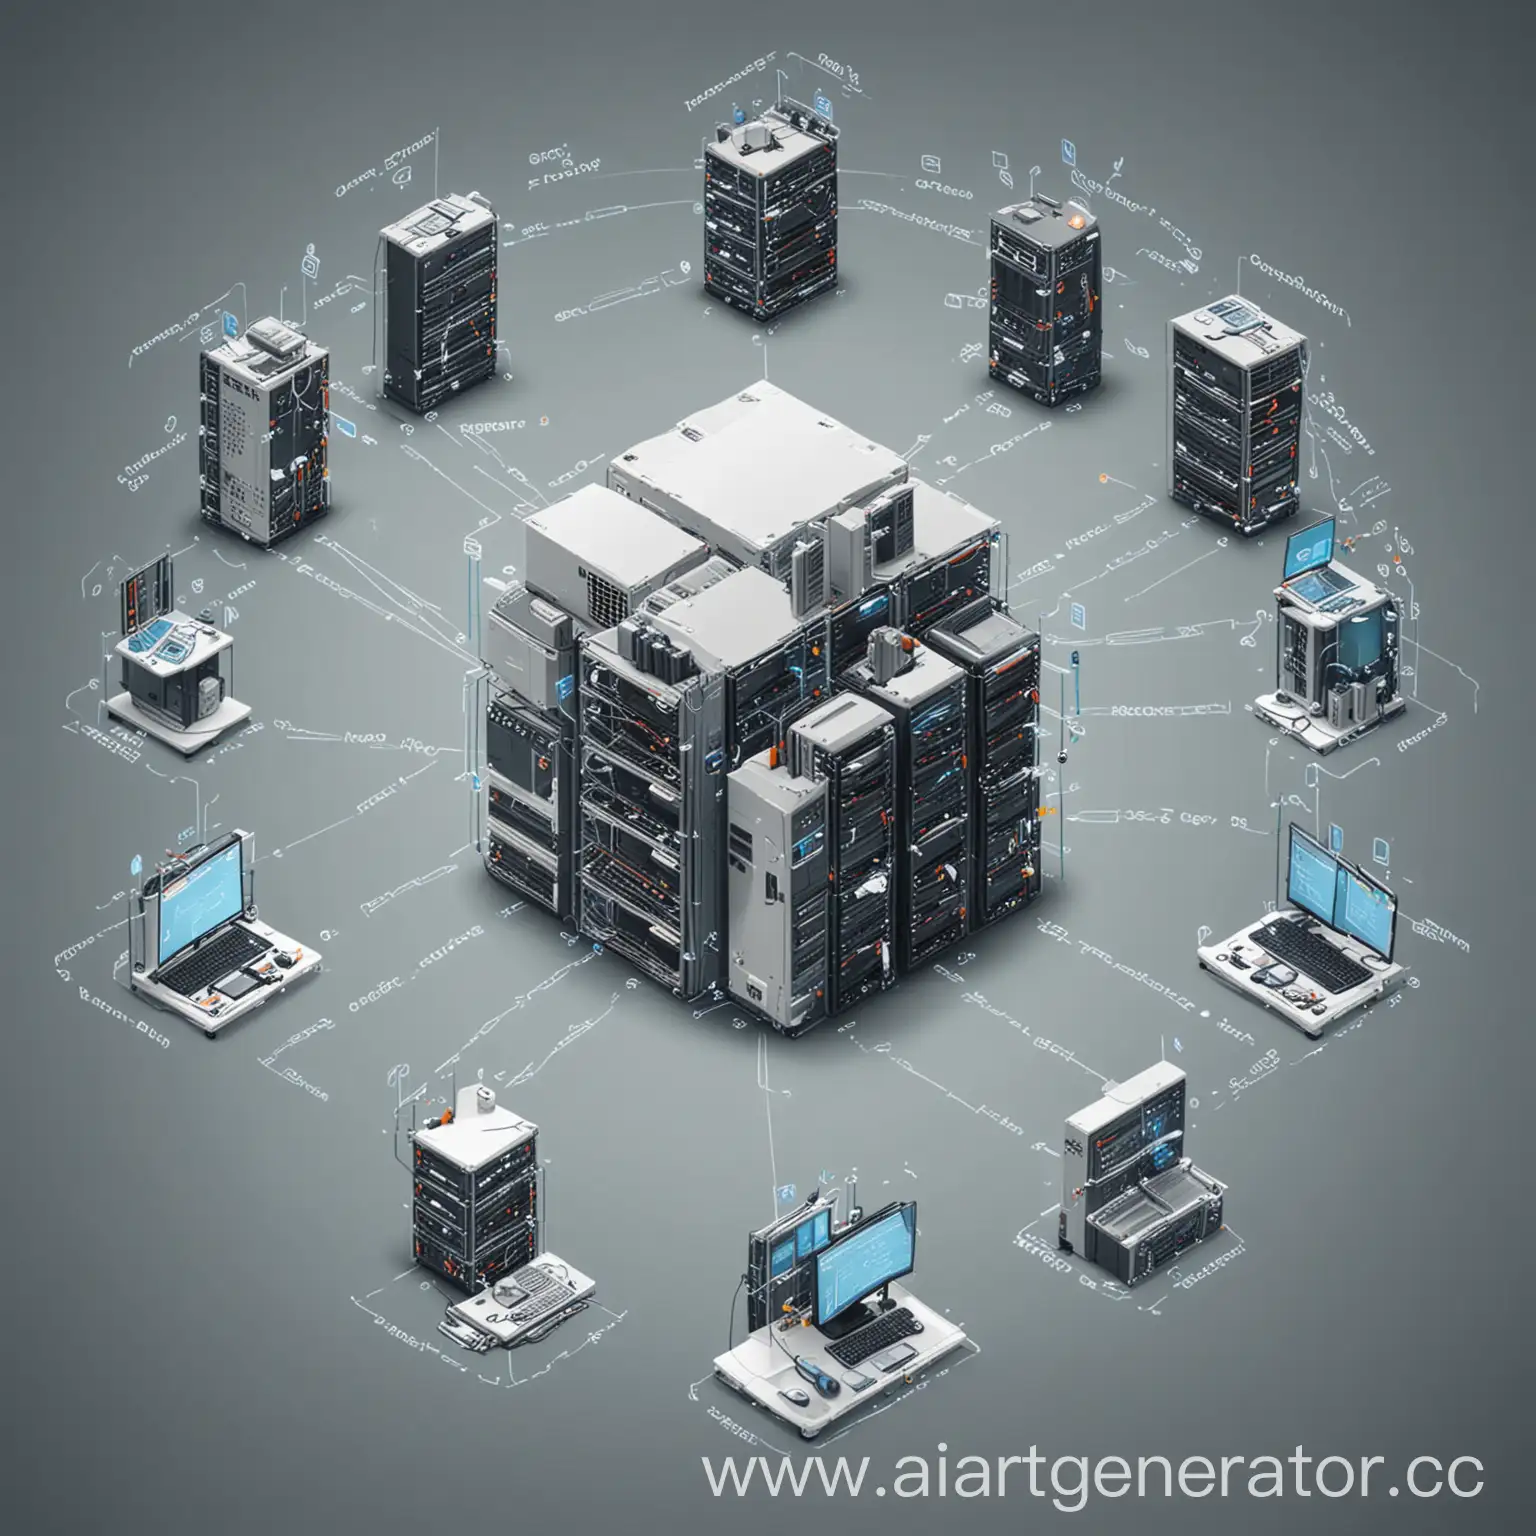 System-Diagram-with-Servers-Databases-Firewalls-and-Communication-Channels